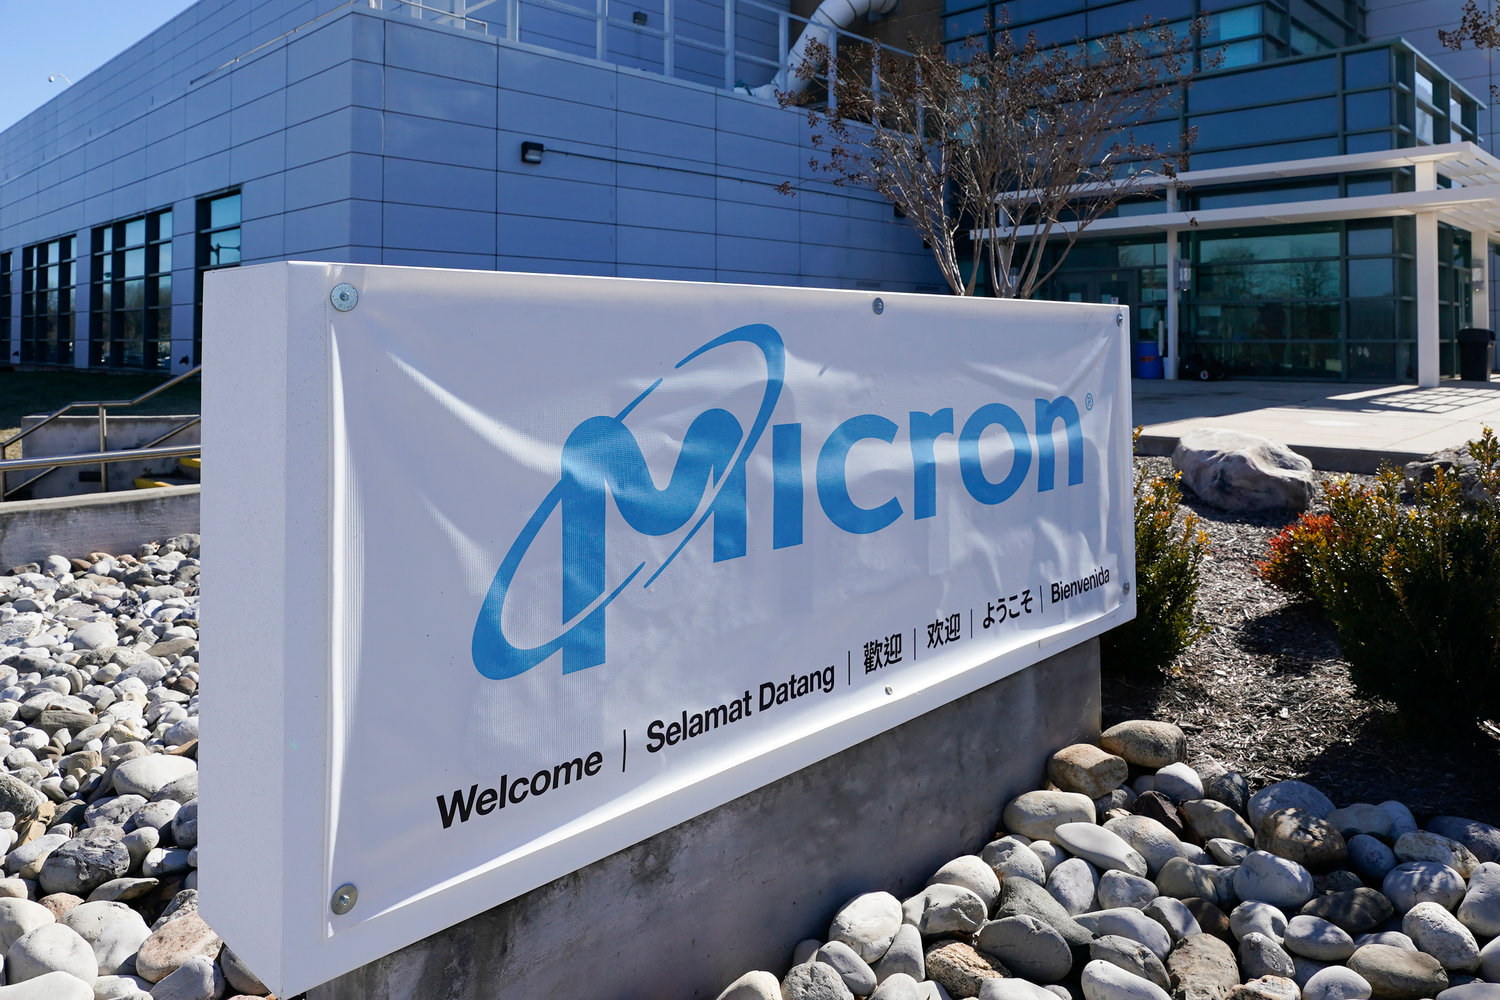 A sign marks the entrance of the Micron Technology automotive chip manufacturing plant on Feb. 11, 2022, in Manassas, Va. Micron, one of the world’s largest microchip manufacturers, is expected to open a semiconductor plant in New York, promising a $100 billion investment and a plant that could bring 50,000 jobs to the state. Senate Majority Leader Charles Schumer confirmed the company's plan to The Associated Press after speaking to its leaders.